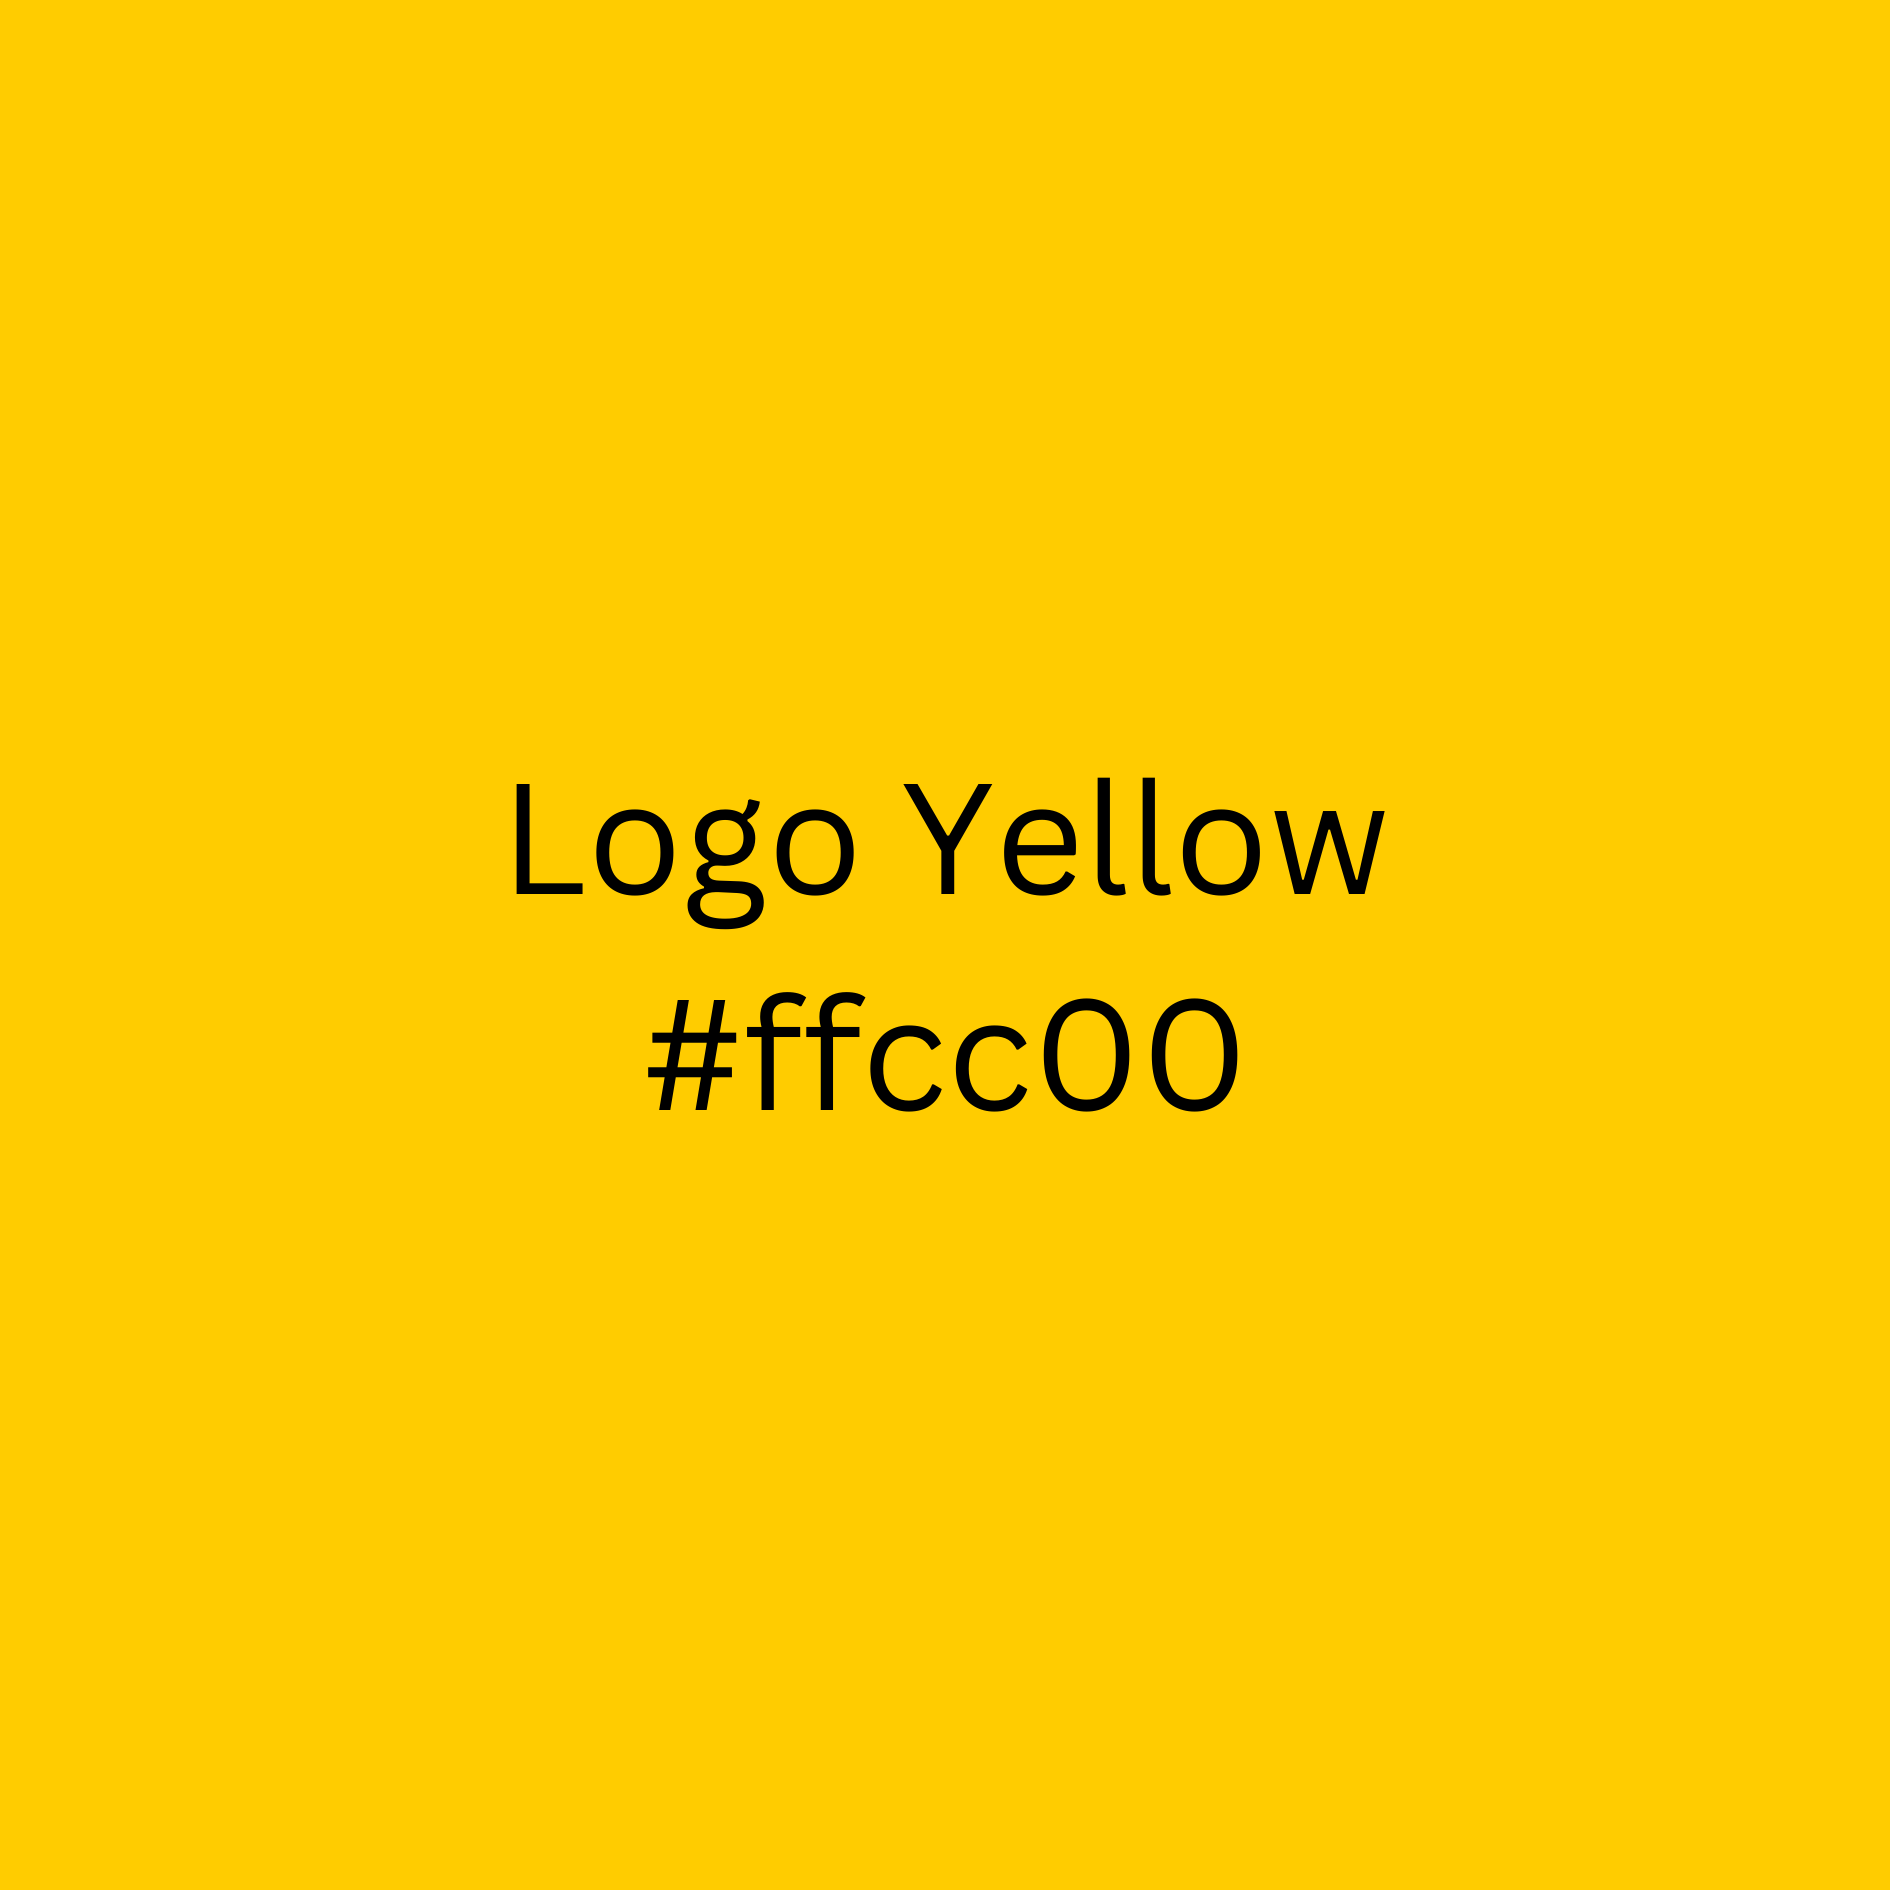 Primary Yellow Used In Logo